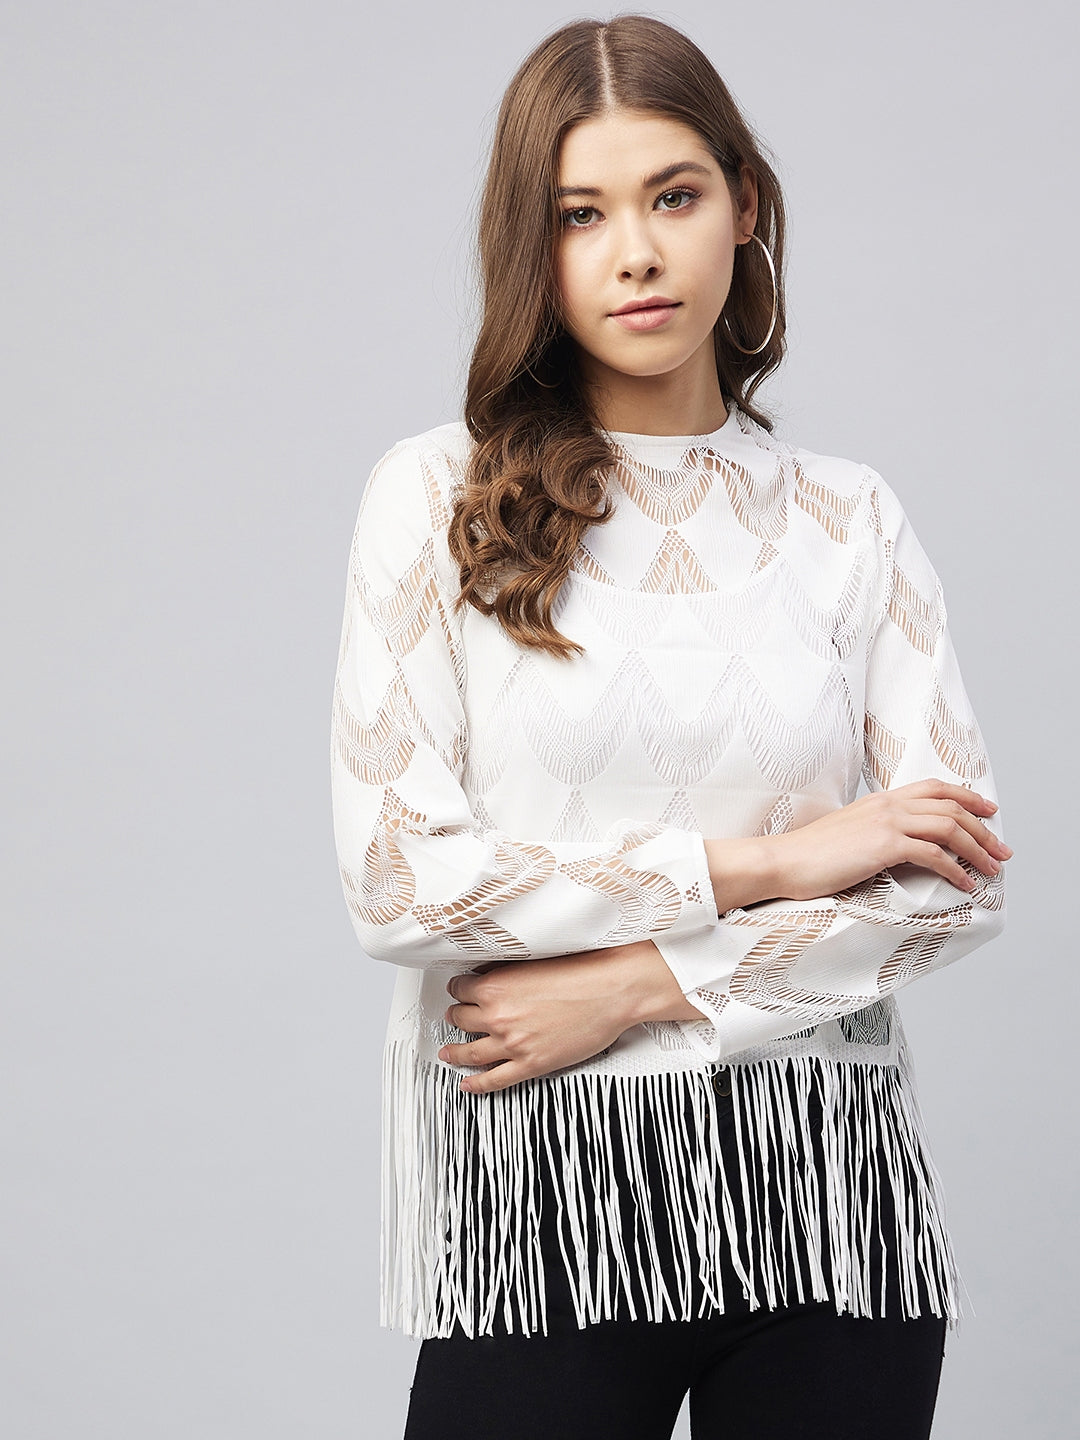 Women's White Sheer Lace Top with Fringes (Inner not provided)